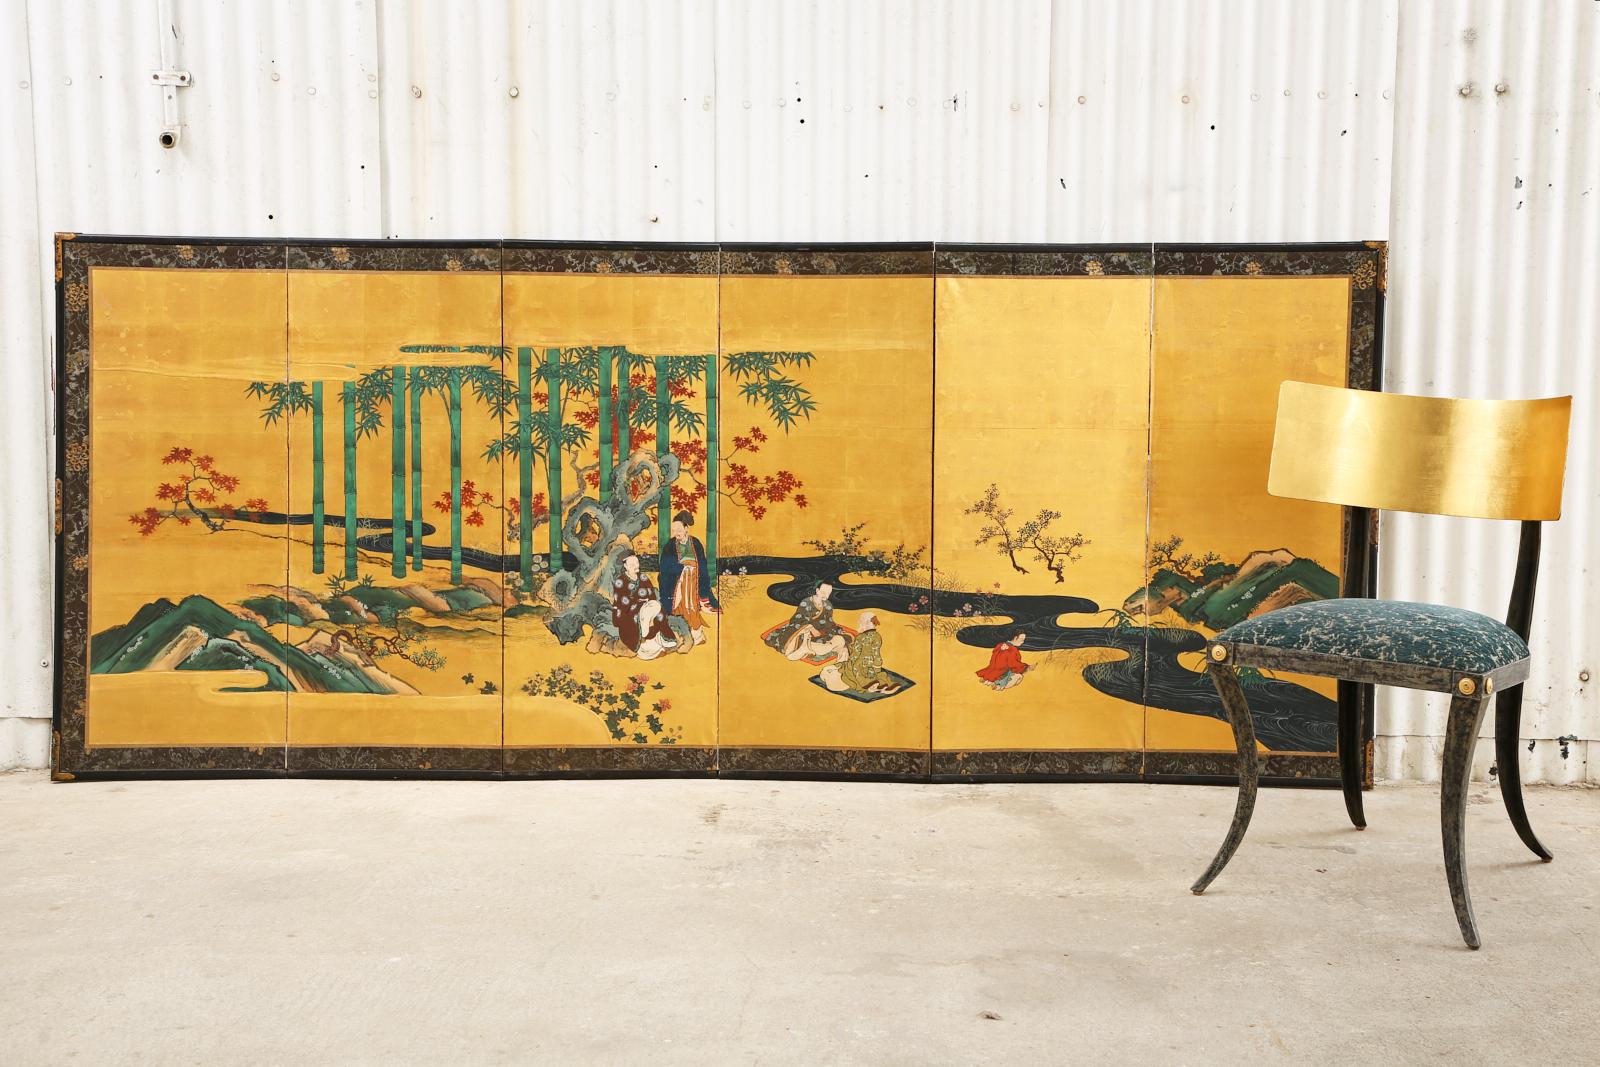 Fantastic pair of 19th century Japanese late Edo/early Meiji period six-panel screens titled The seven sages of the bamboo grove. The Kano school screens depict a group of Daoist Chinese scholars, writers, and musicians from the third century CE.